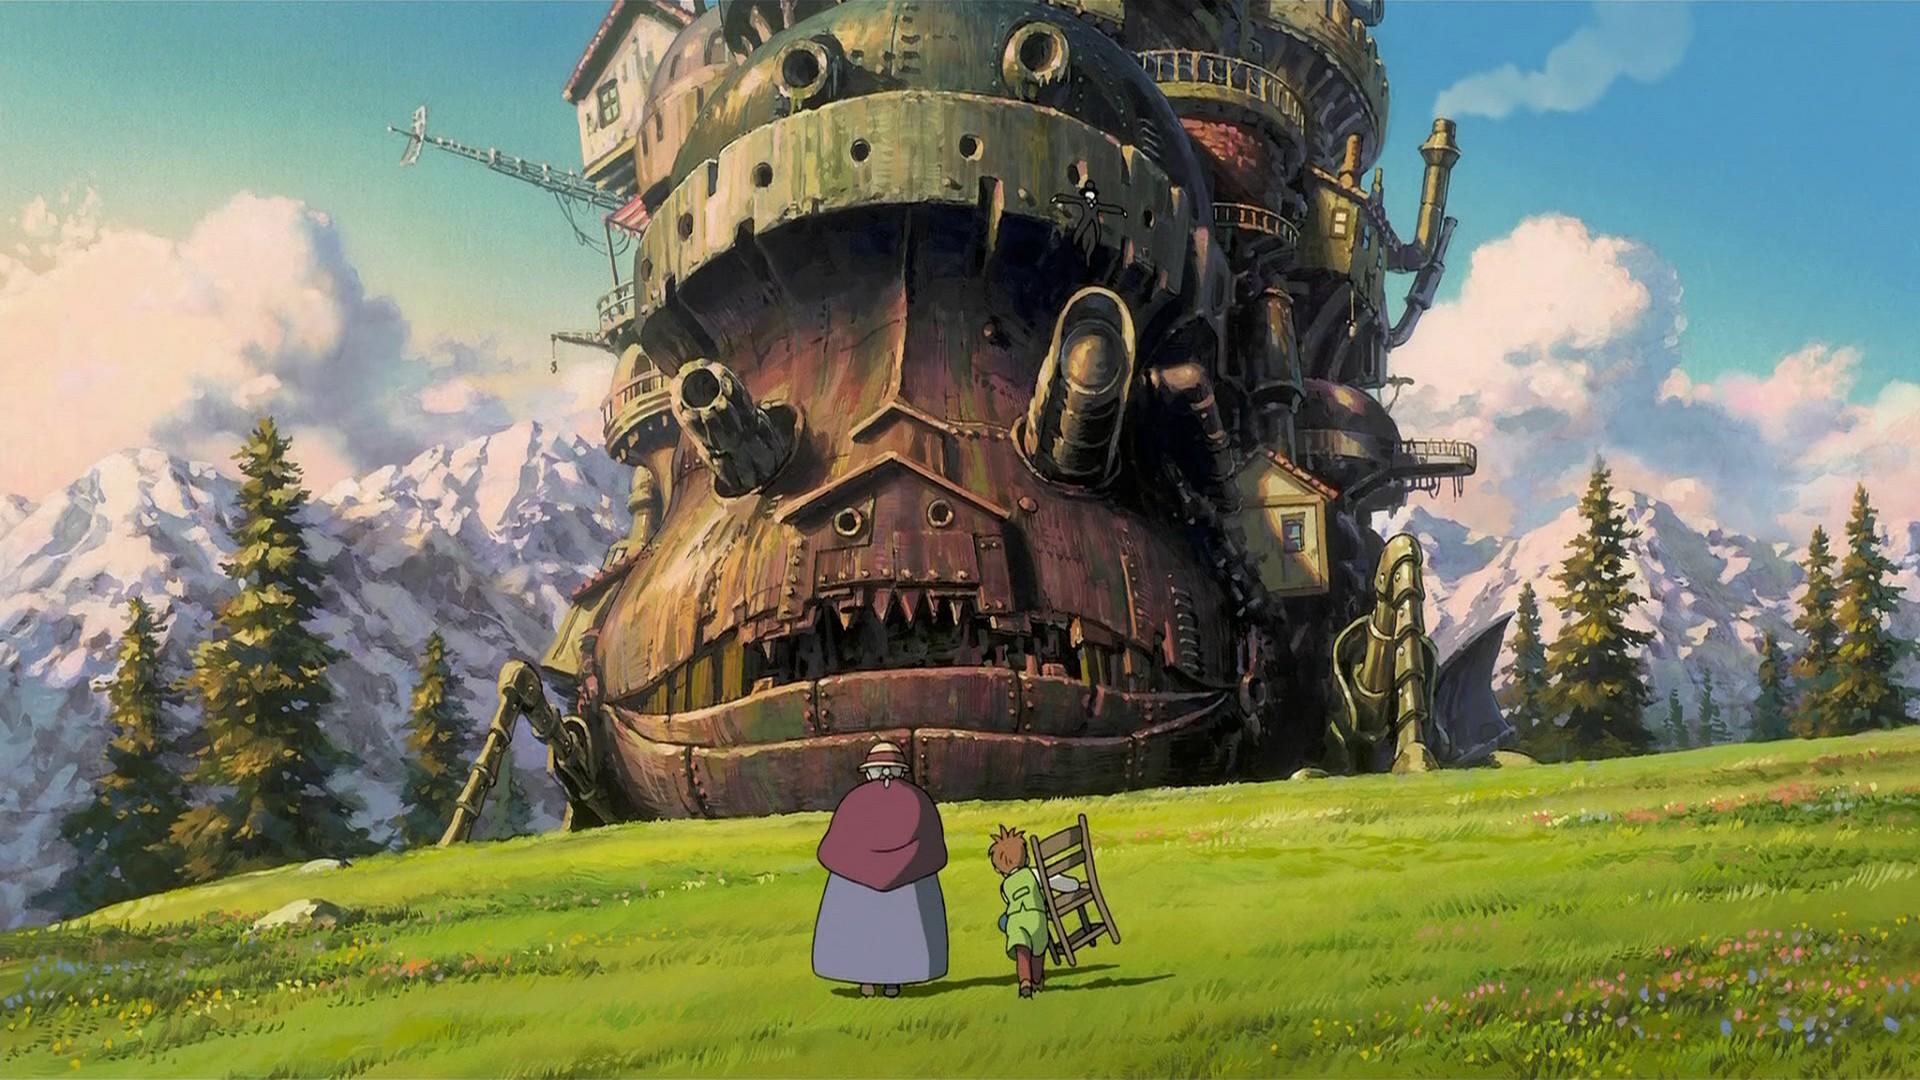 HOWL'S MOVING CASTLE Gets The SHOUT! FACTORY Treatment [Blu Review]